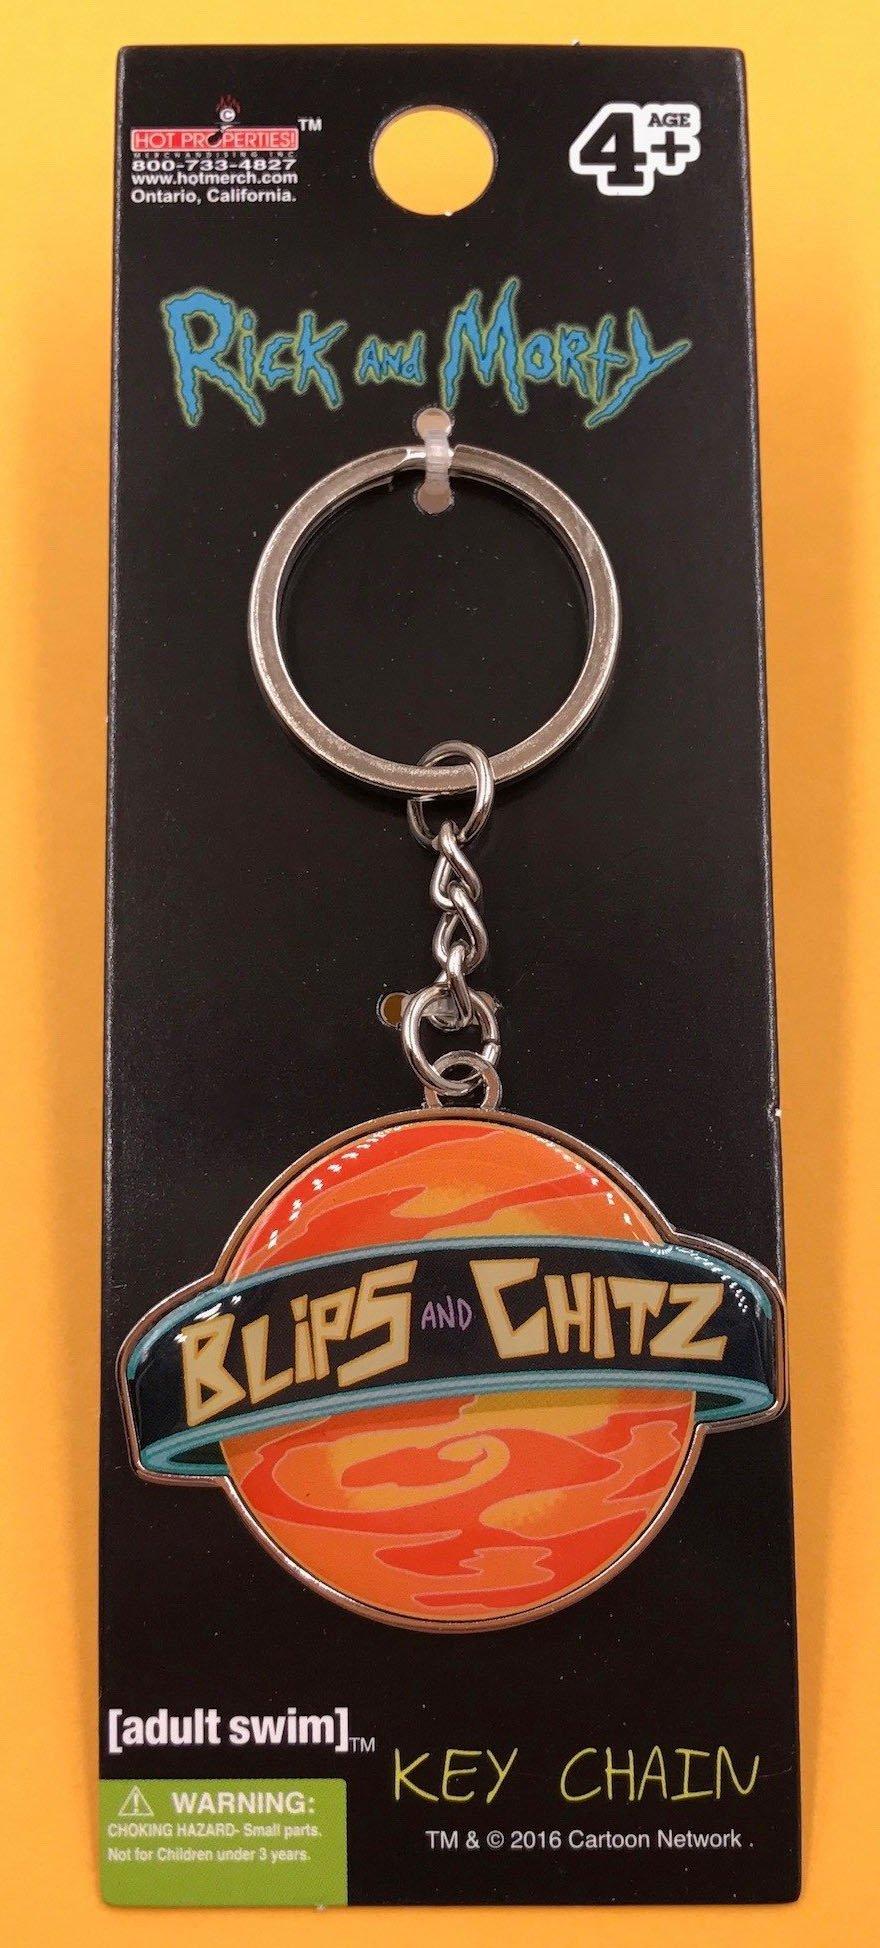 Rick and Morty Blips and Chitz Keychain